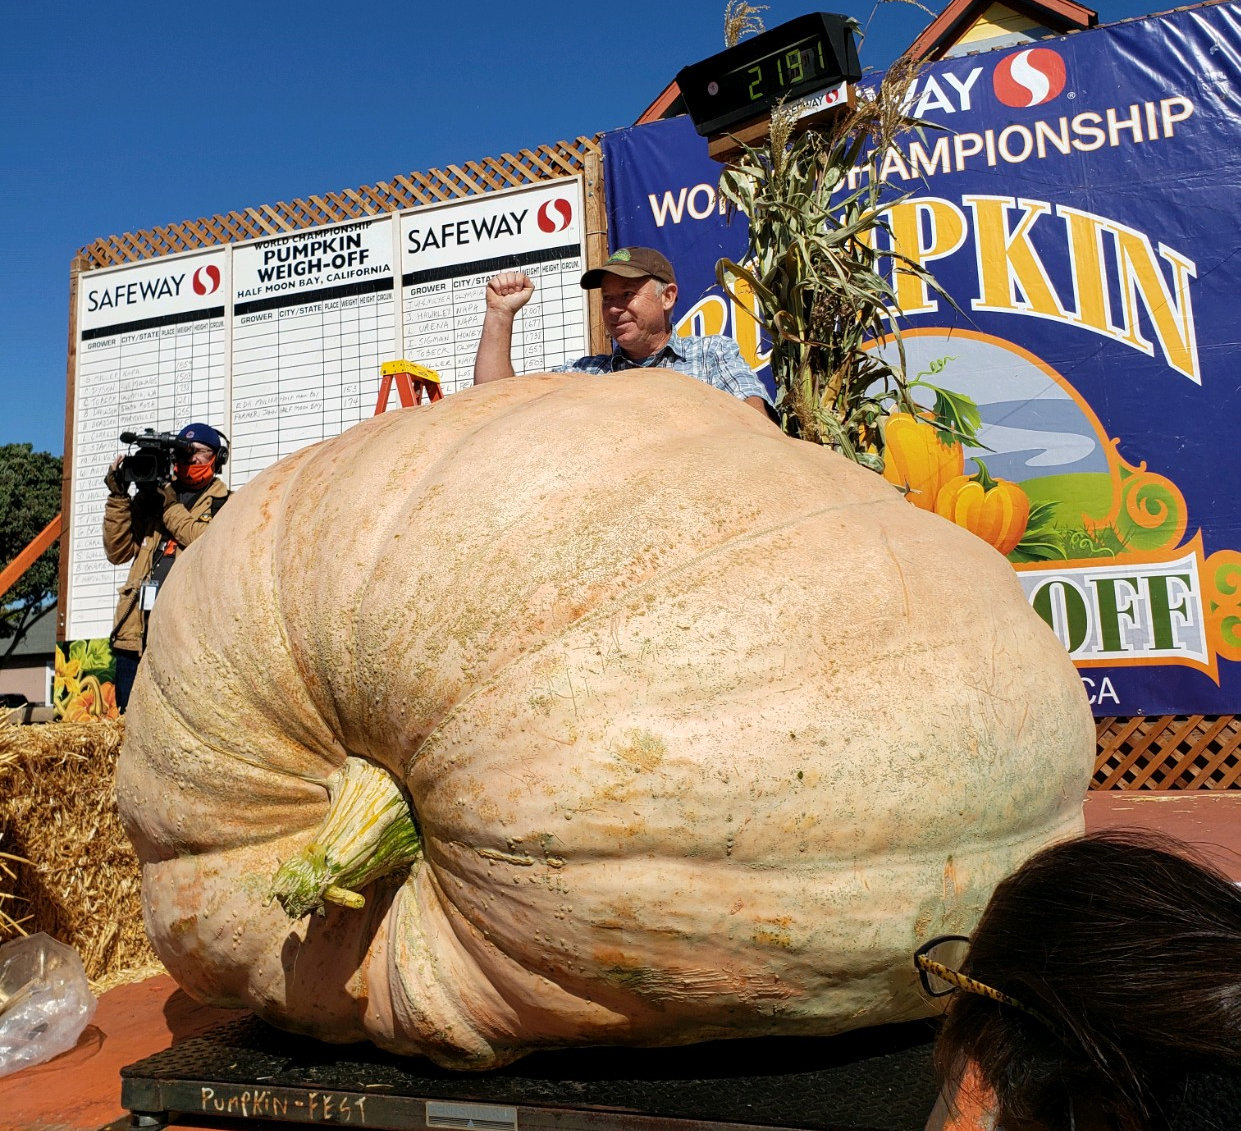 Jeff Uhlmeyer is shown standing behind his world-champion giant pumpkin in October 2021.